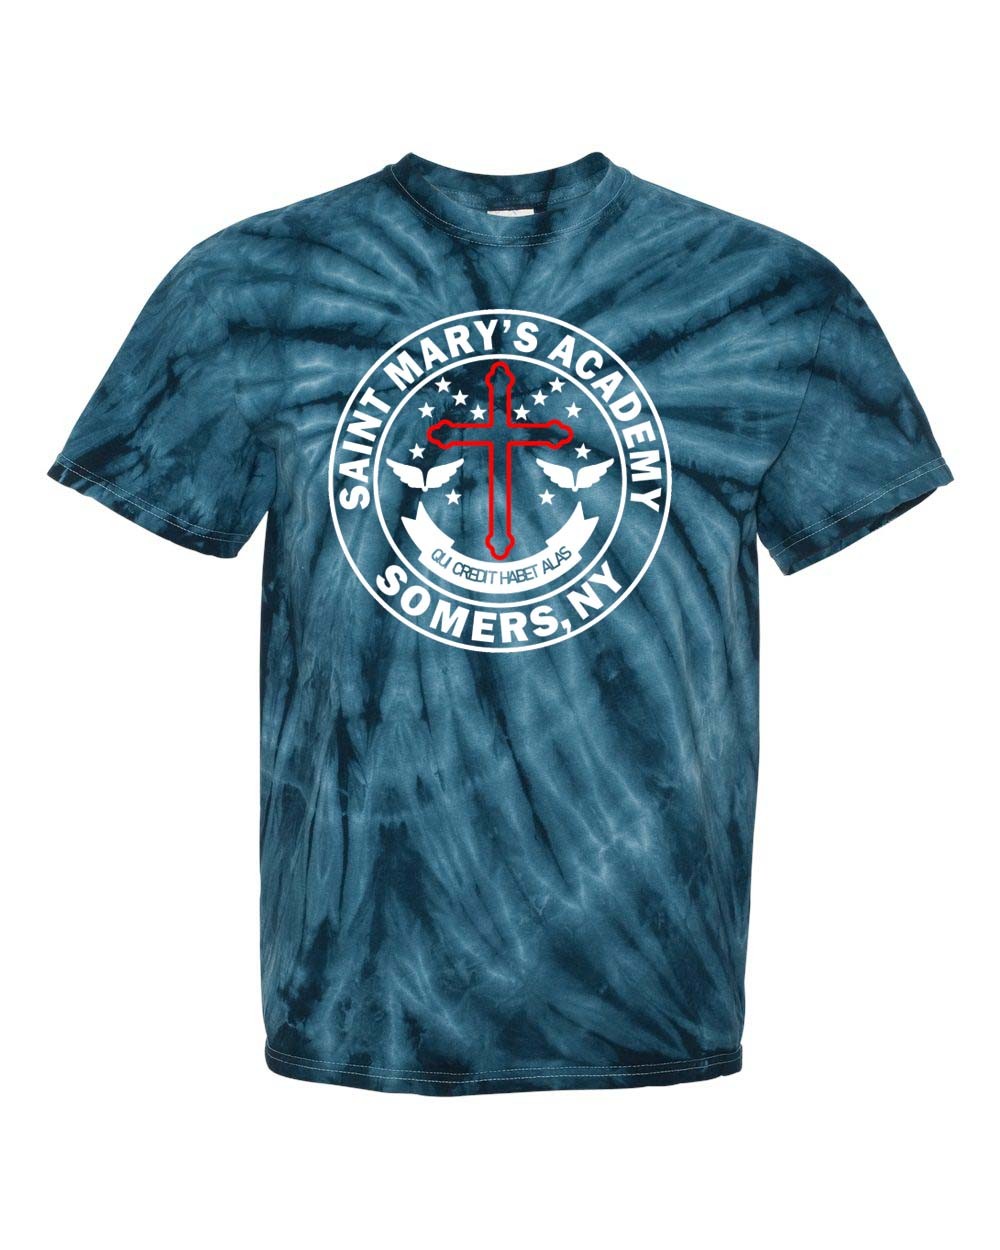 SMA Spirit S/S Tie Dye T-Shirt w/ Crest Logo - Please Allow 2-3 Weeks for Delivery